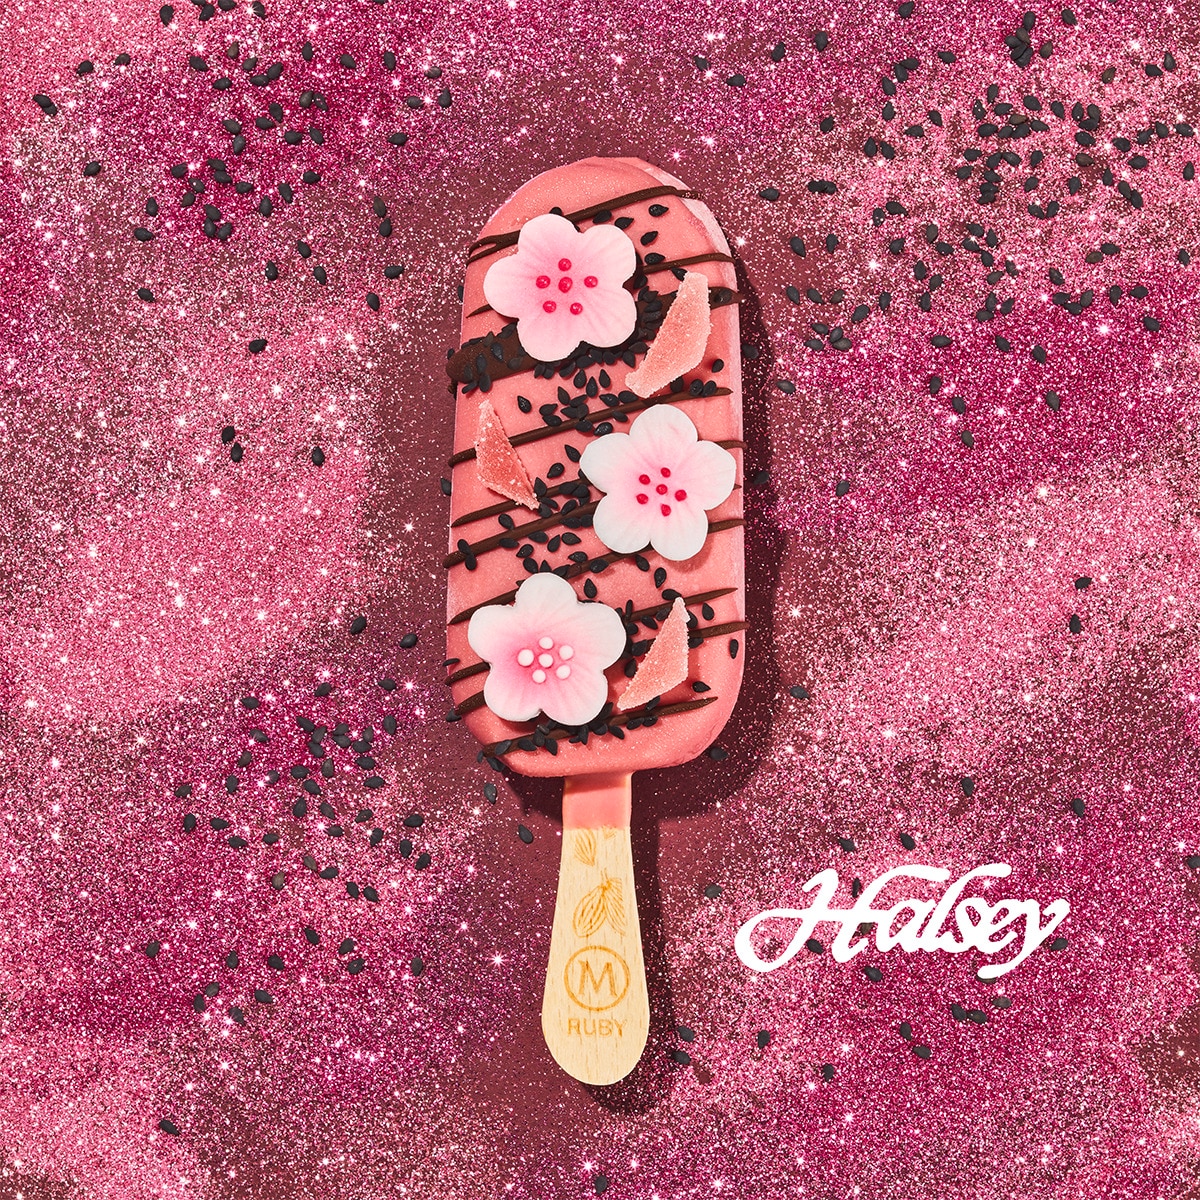 My Magnum created for Halsey